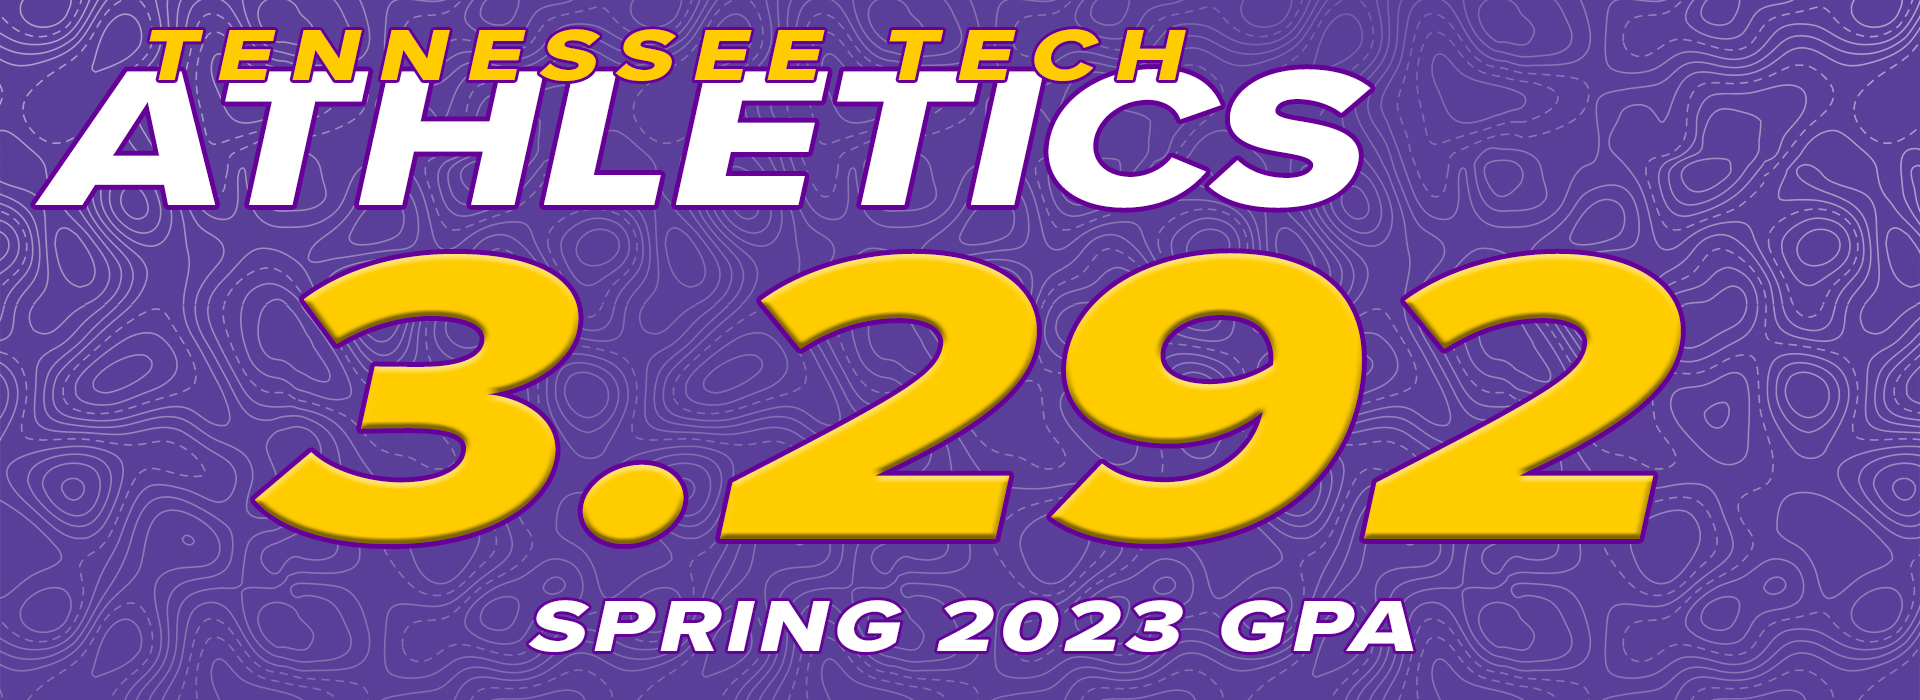 Golden Eagle Athletics records 29th straight semester with a 3.0 or better GPA